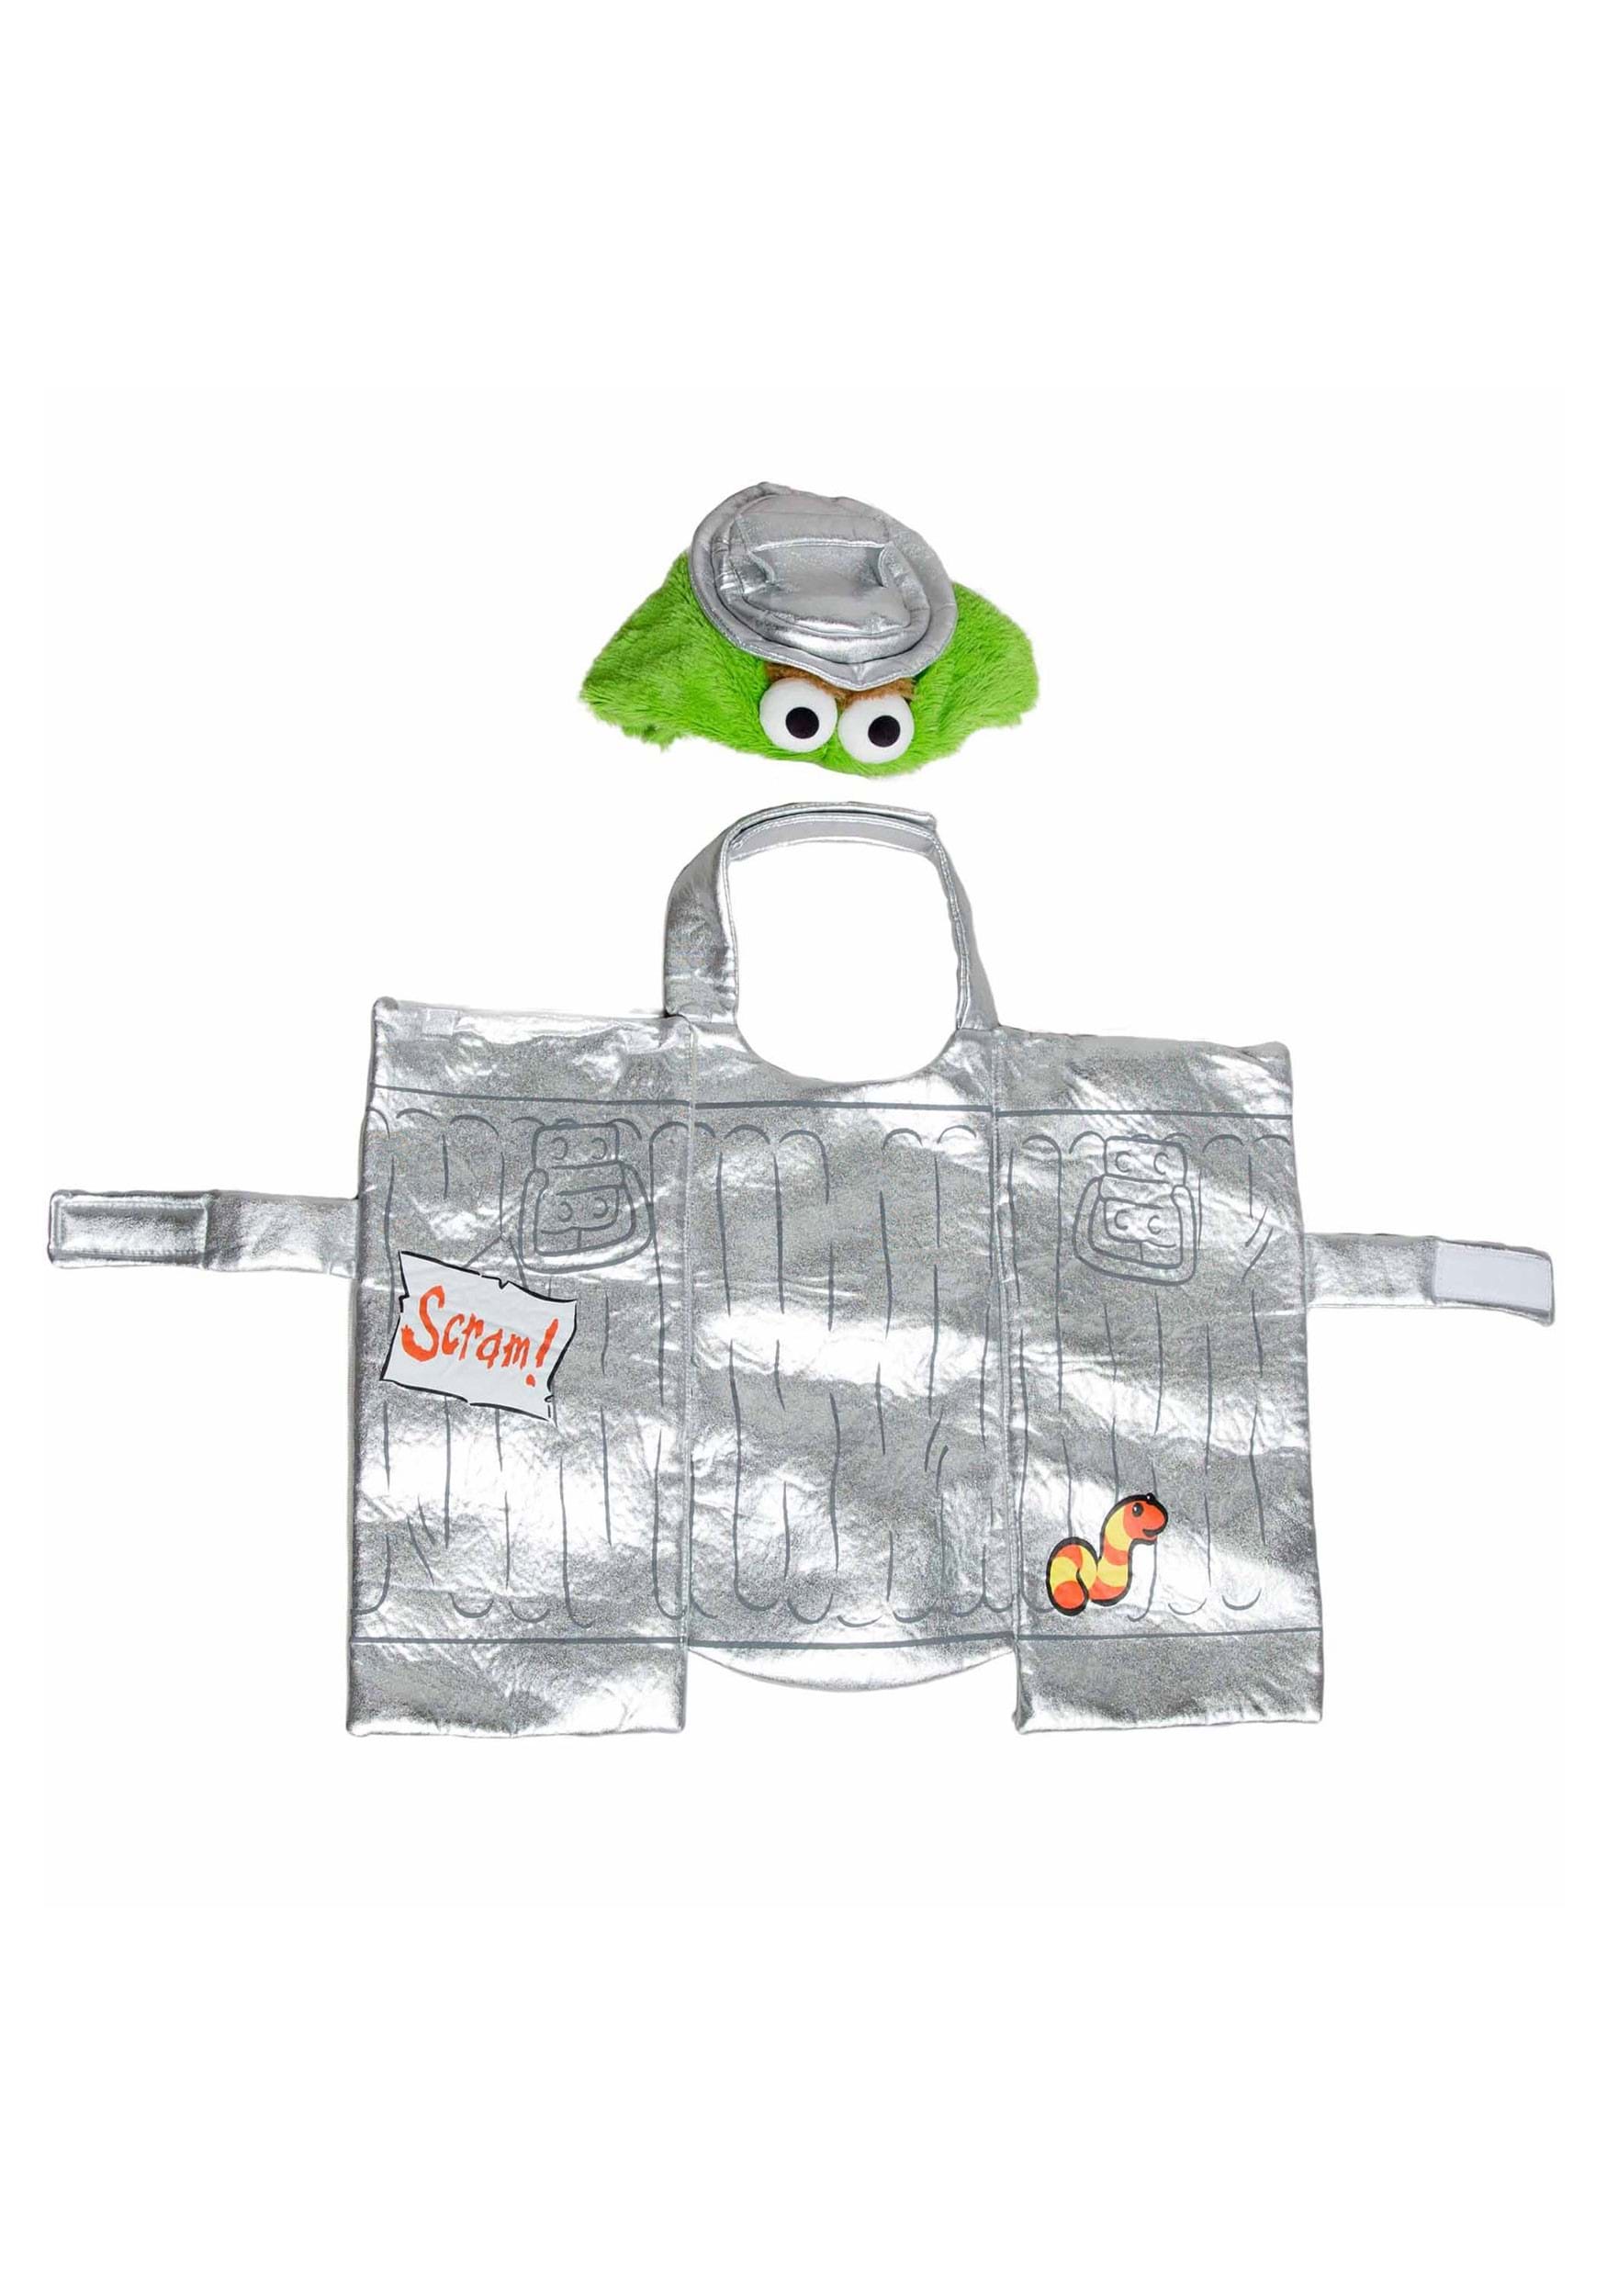 Oscar The Grouch From Sesame Street Pet Costume